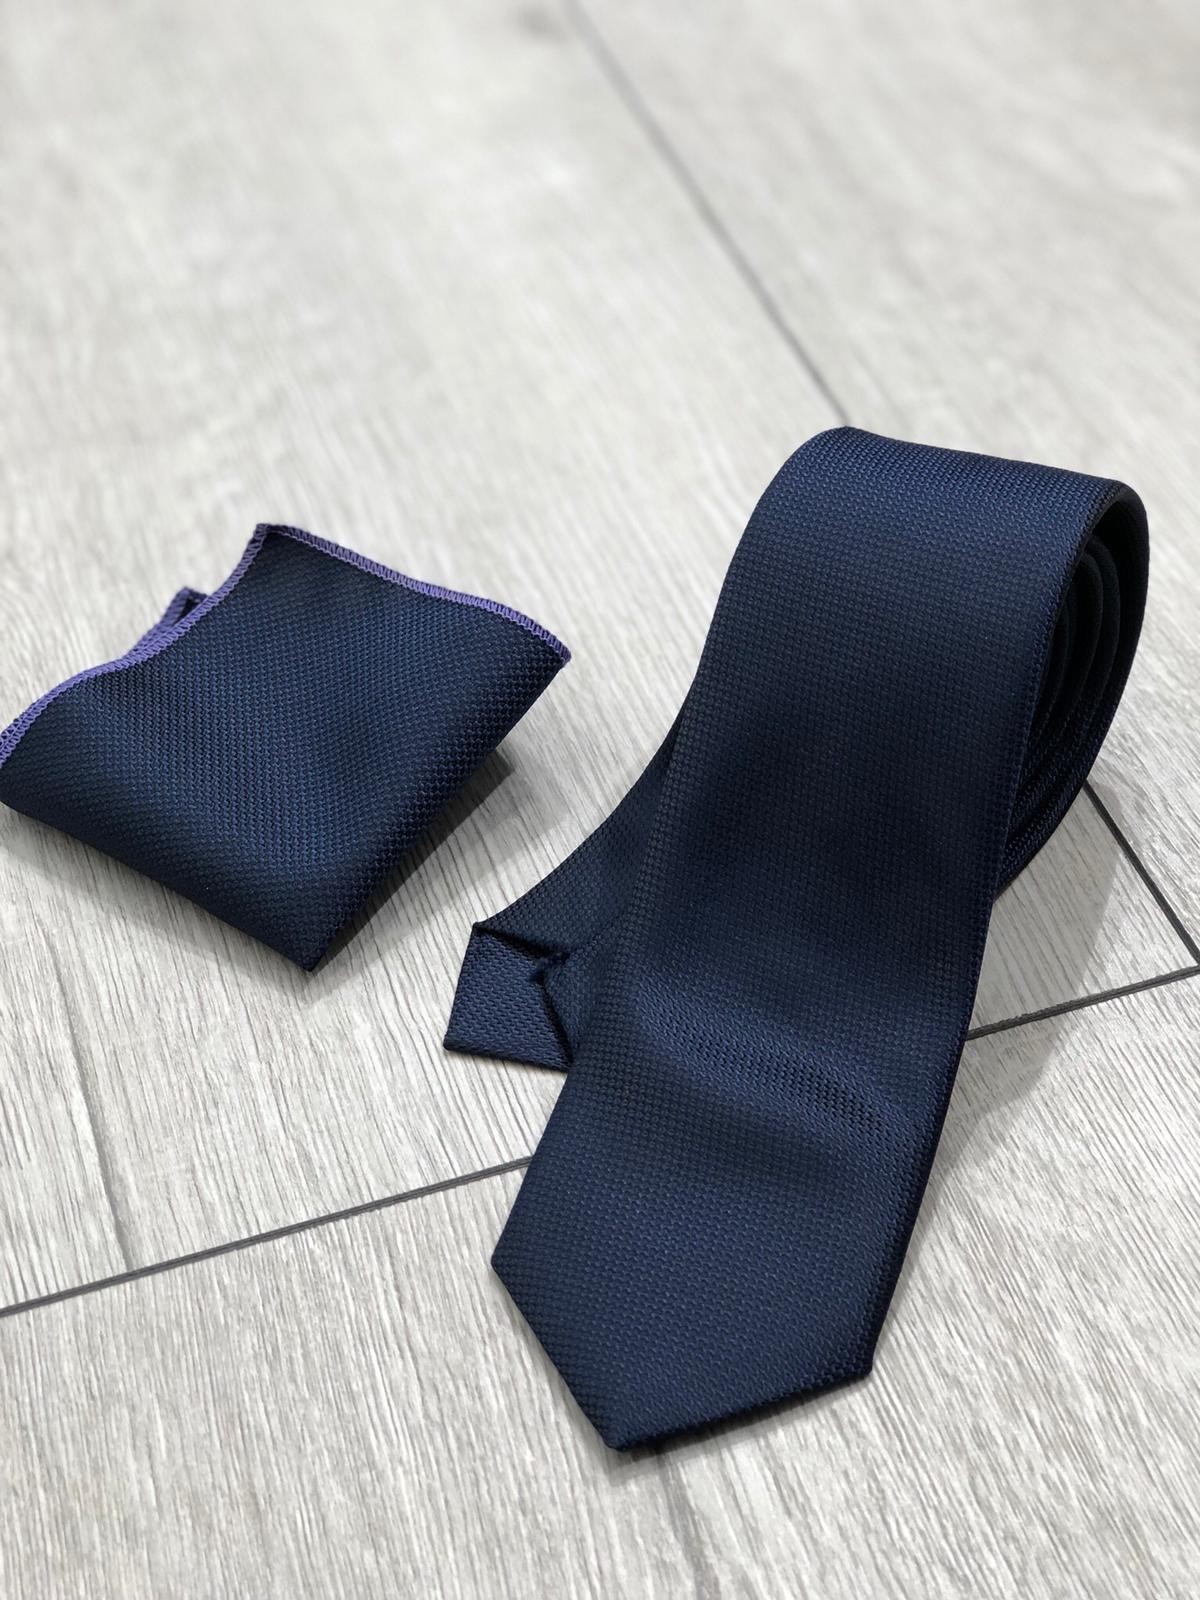 Buy Navy Blue Tie by Gentwith.com with Free Shipping